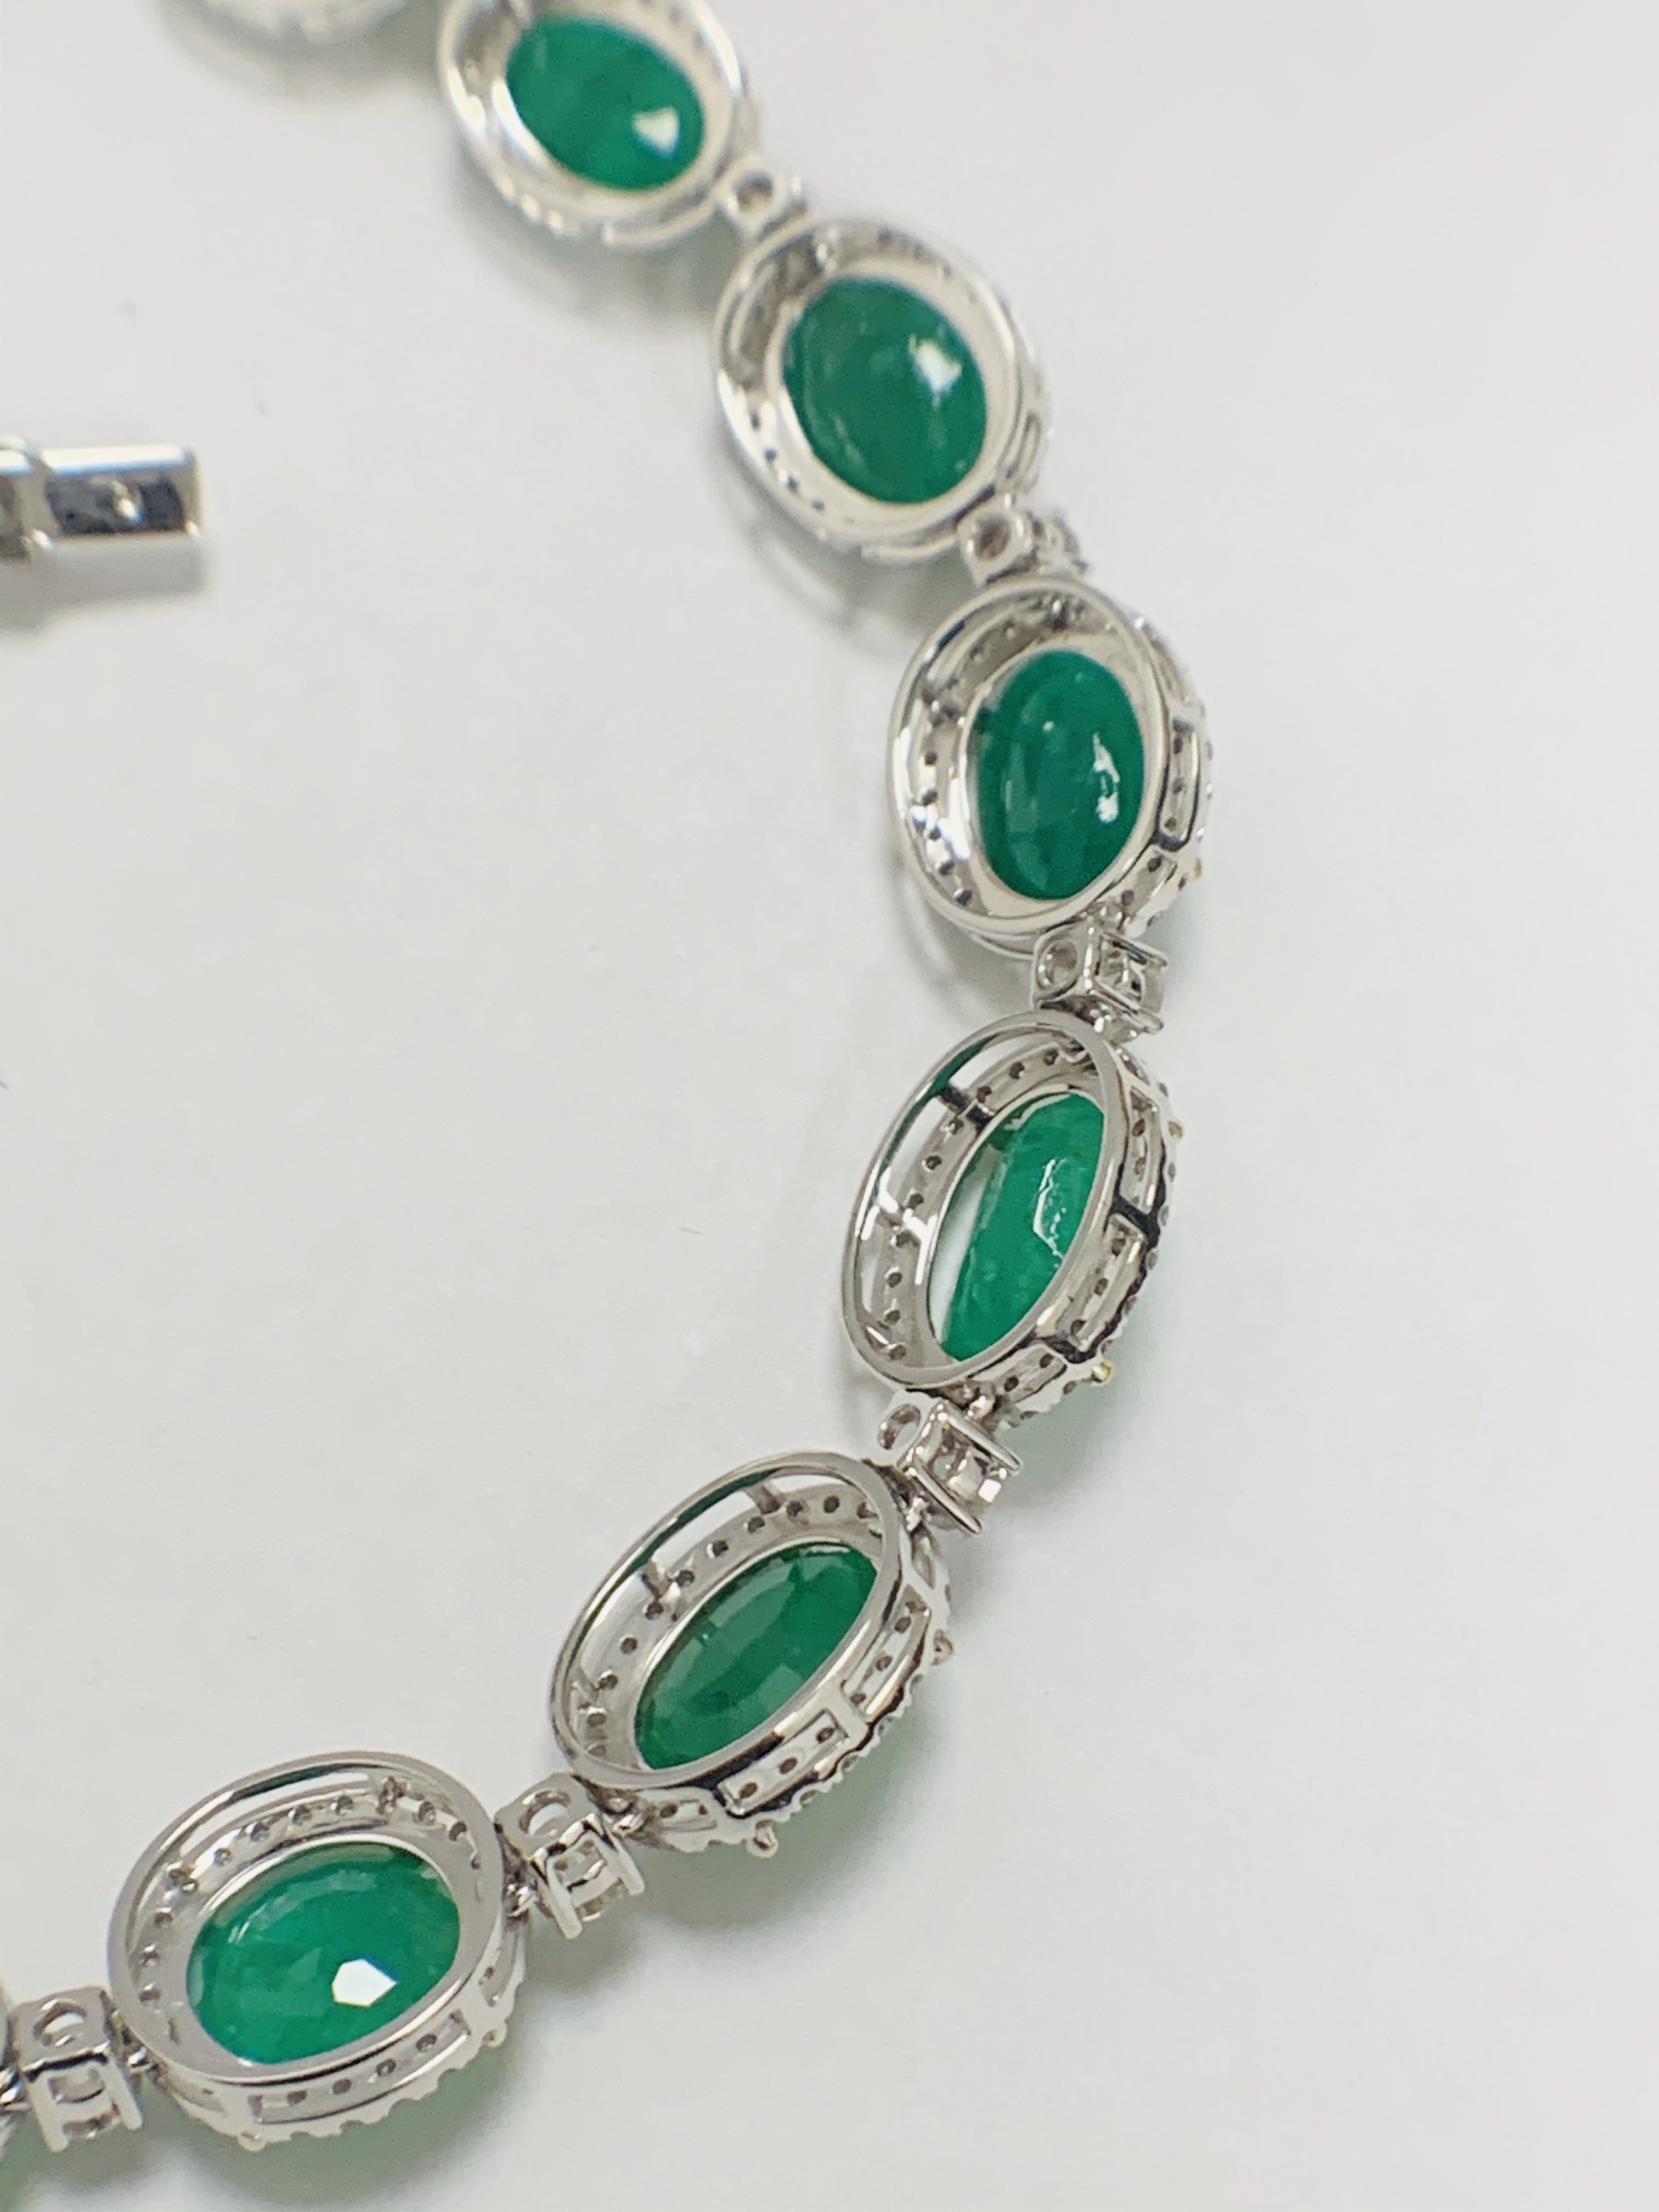 Platinum and Yellow Gold Emerald and Diamond necklace featuring, 29 oval cut, light to deep green Em - Image 17 of 36